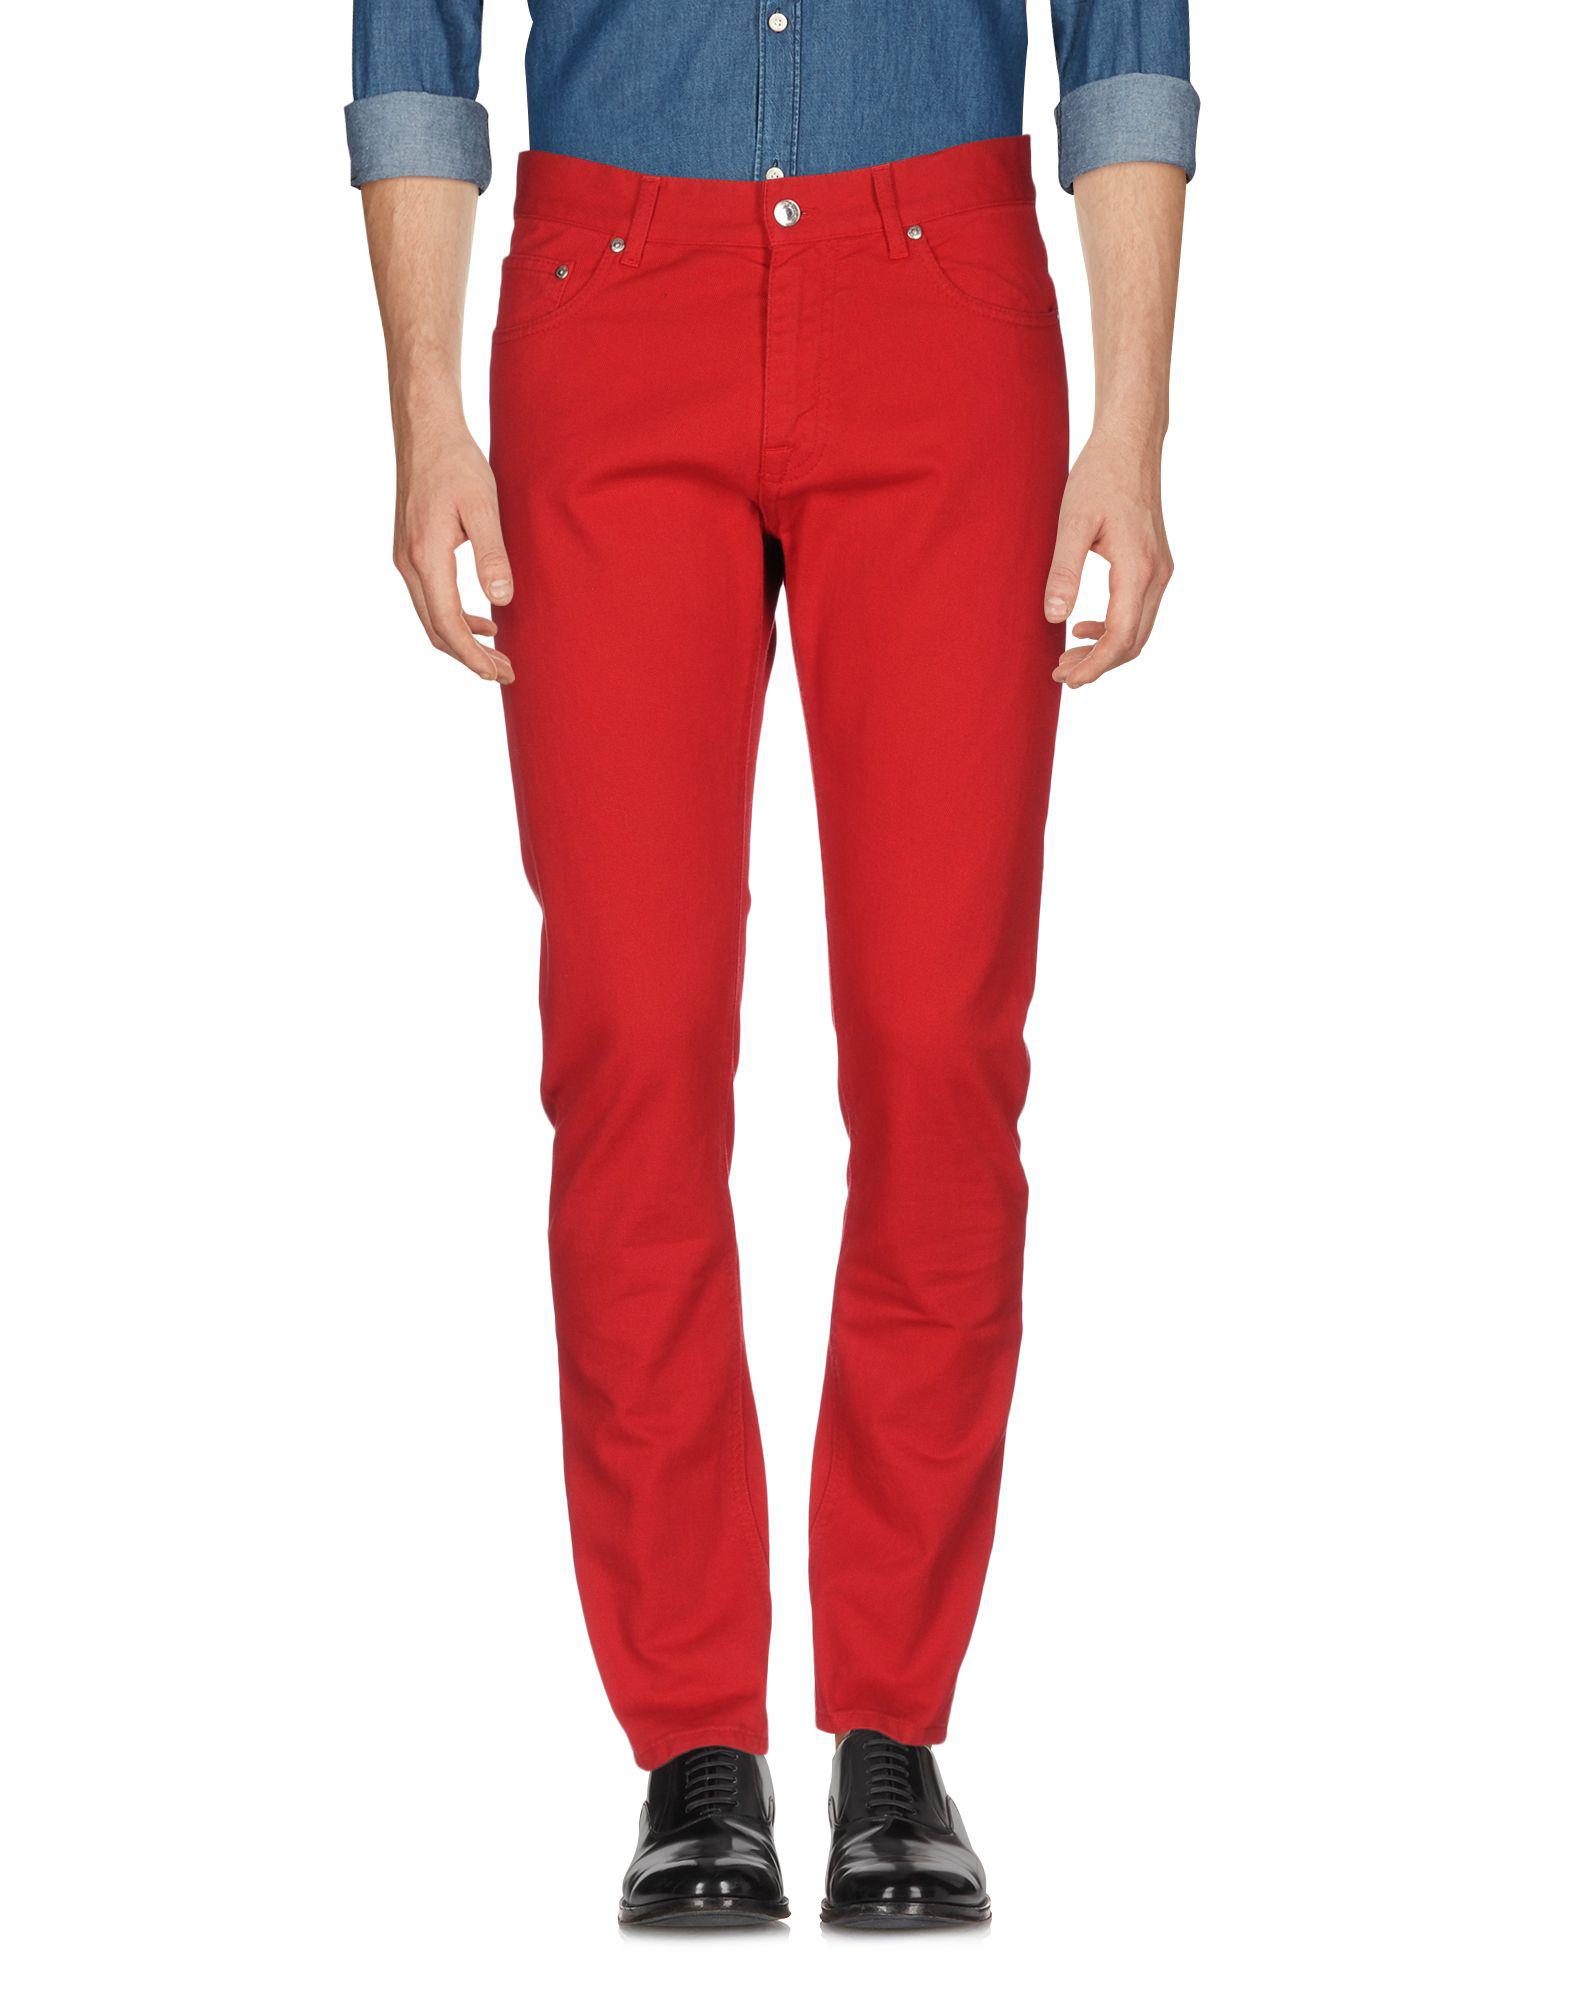 MSGM Cotton Casual Pants in Red for Men - Lyst